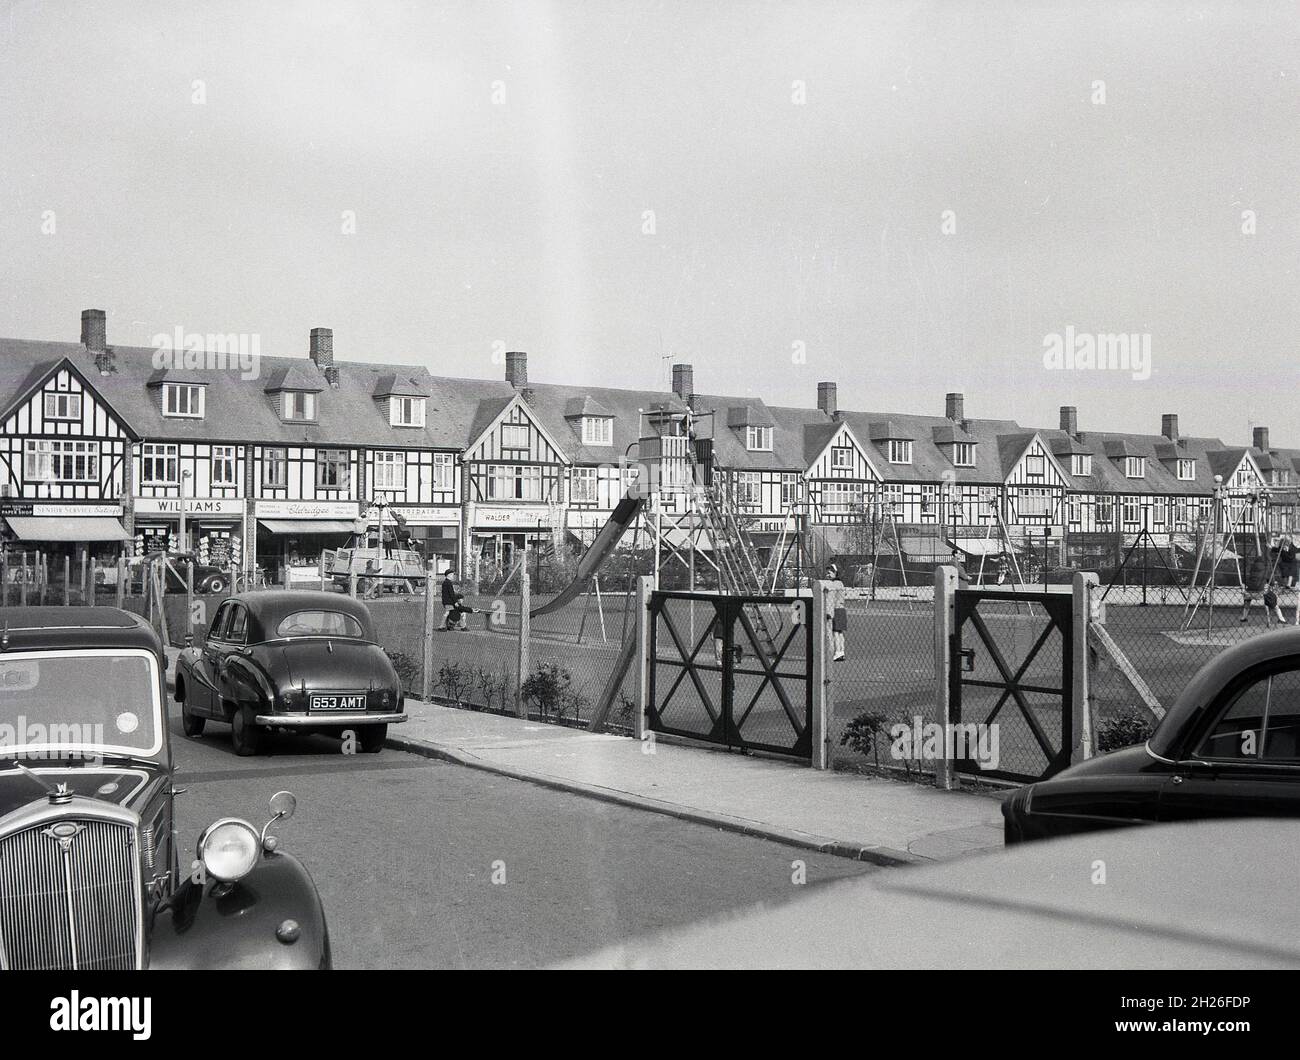 1950s, historical, parade of shops and playground, South east London, England, UK, with cars of the era parked beside. Maybe Abbey Wood or Eltham. Stock Photo